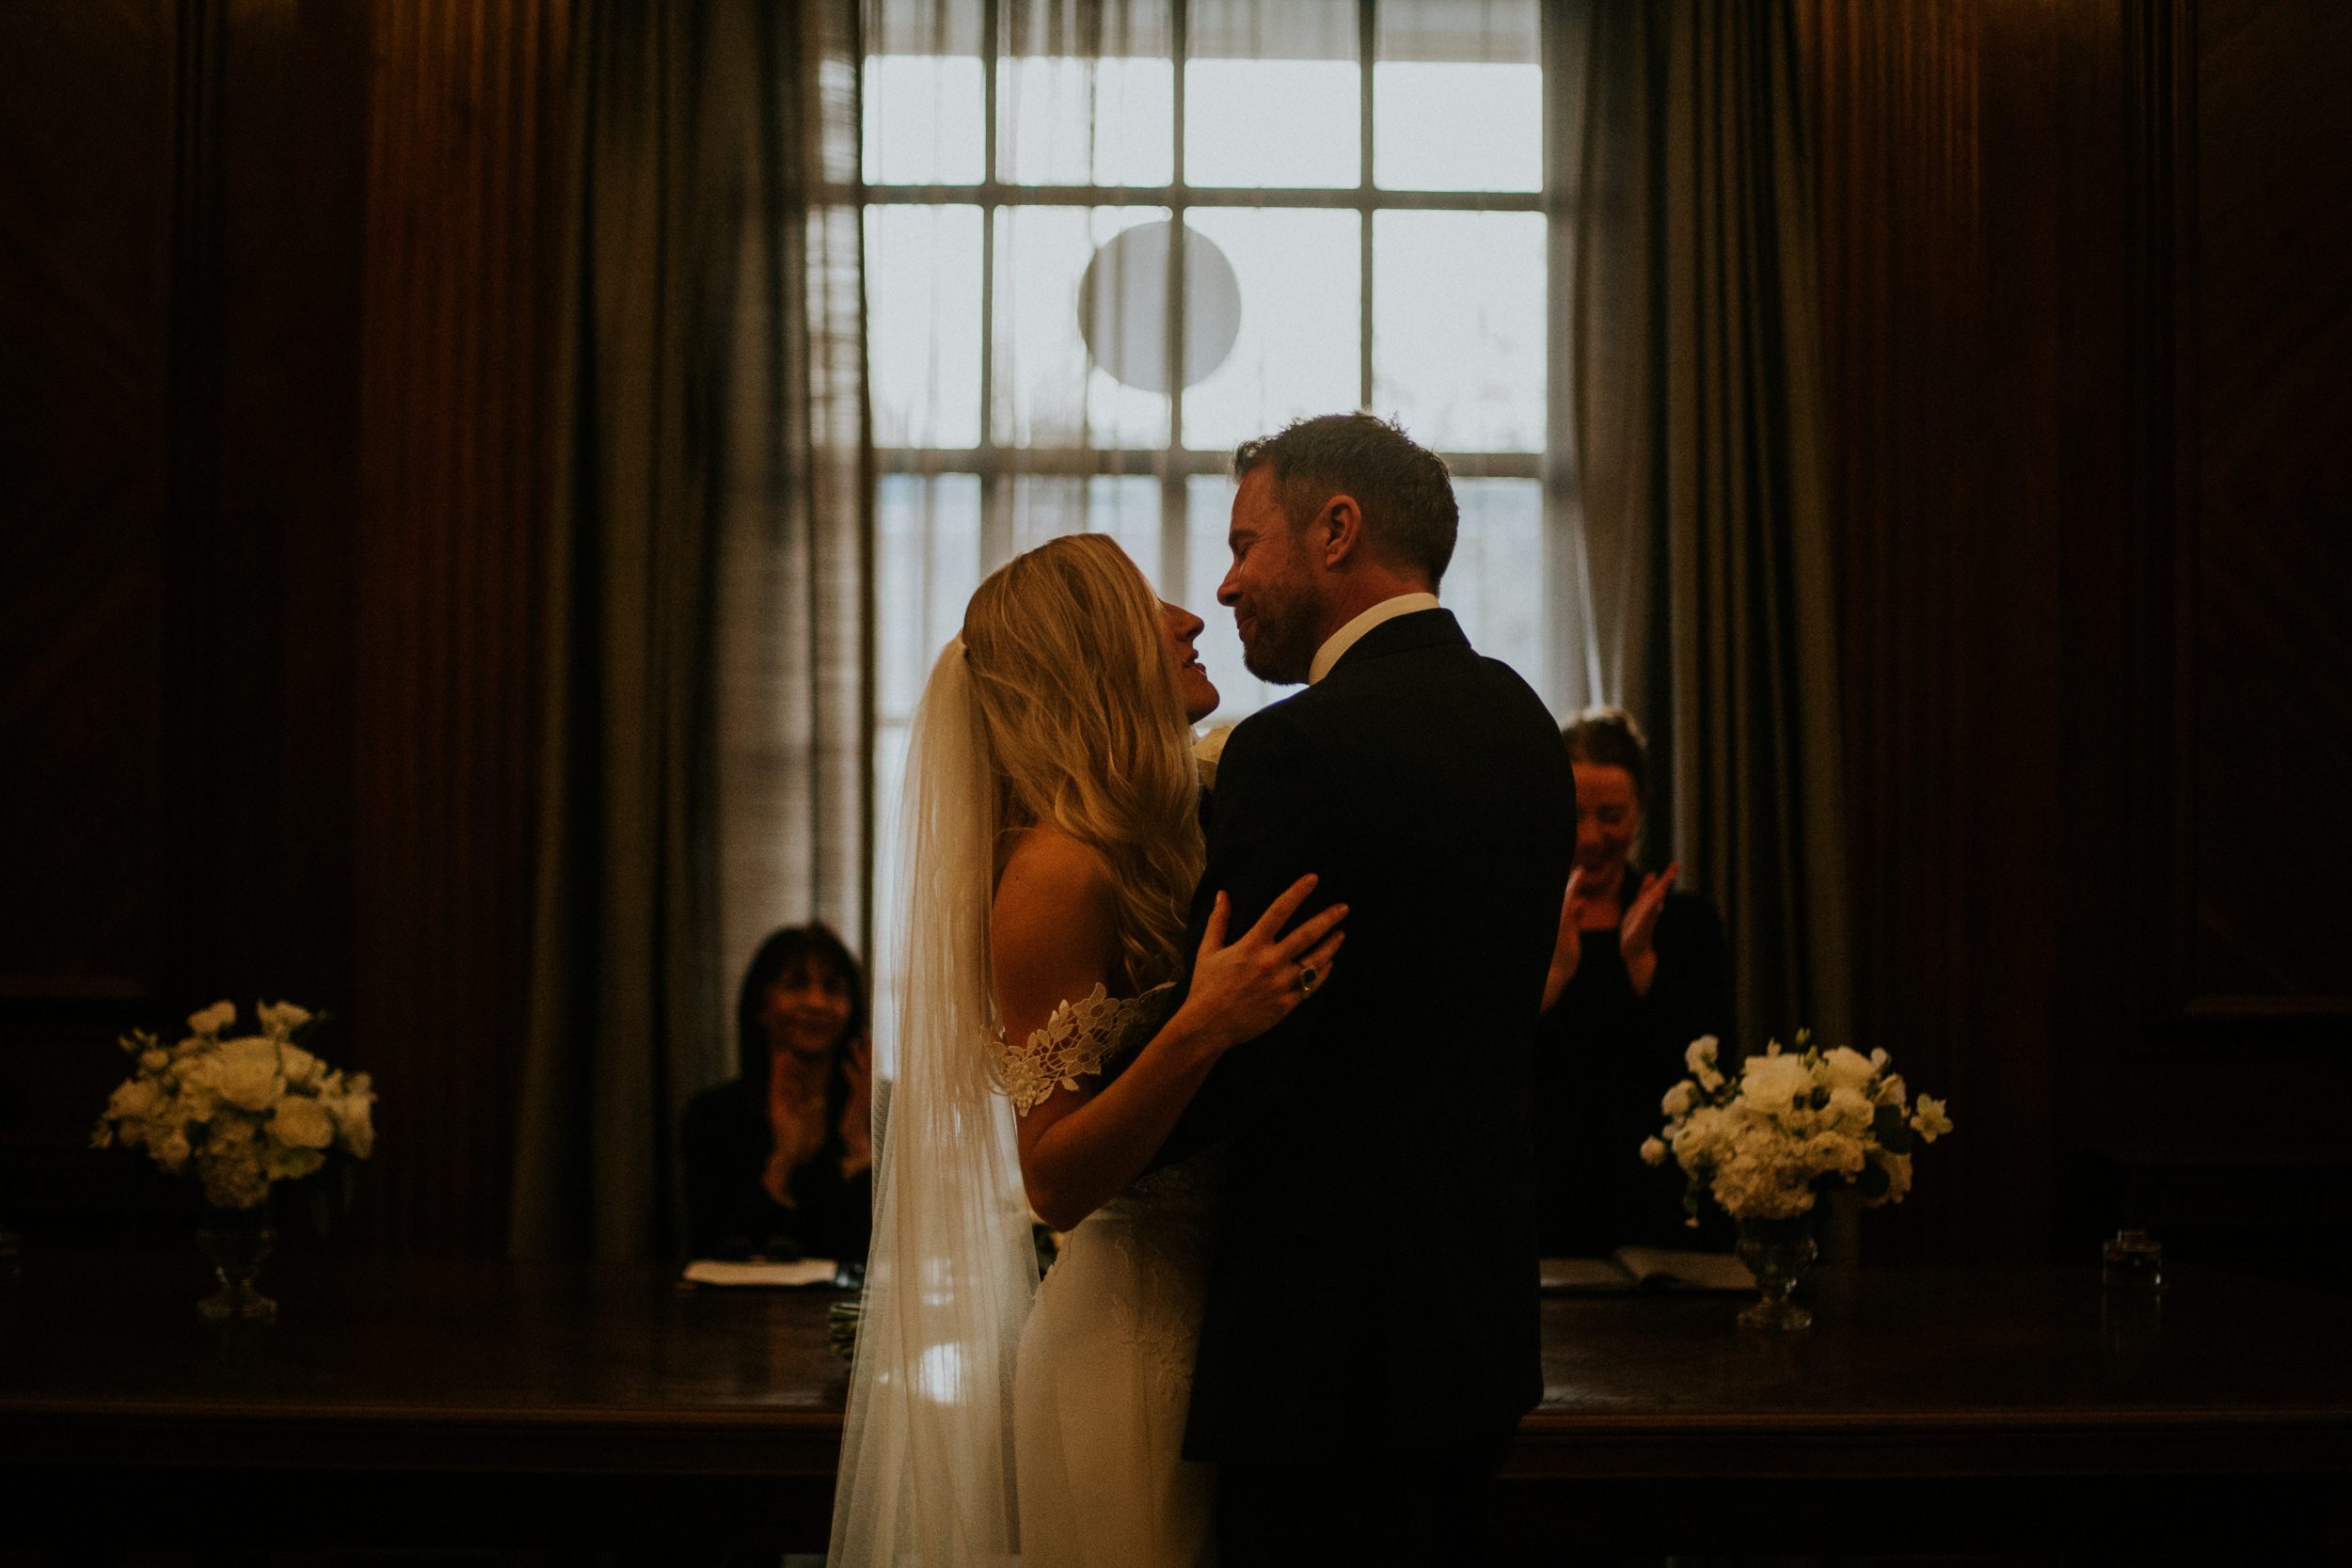 A bride and groom share their first kiss as man and wife during their wedding ceremony at Old Marylebone Town Hall. Old Marylebone Town Hall wedding photography